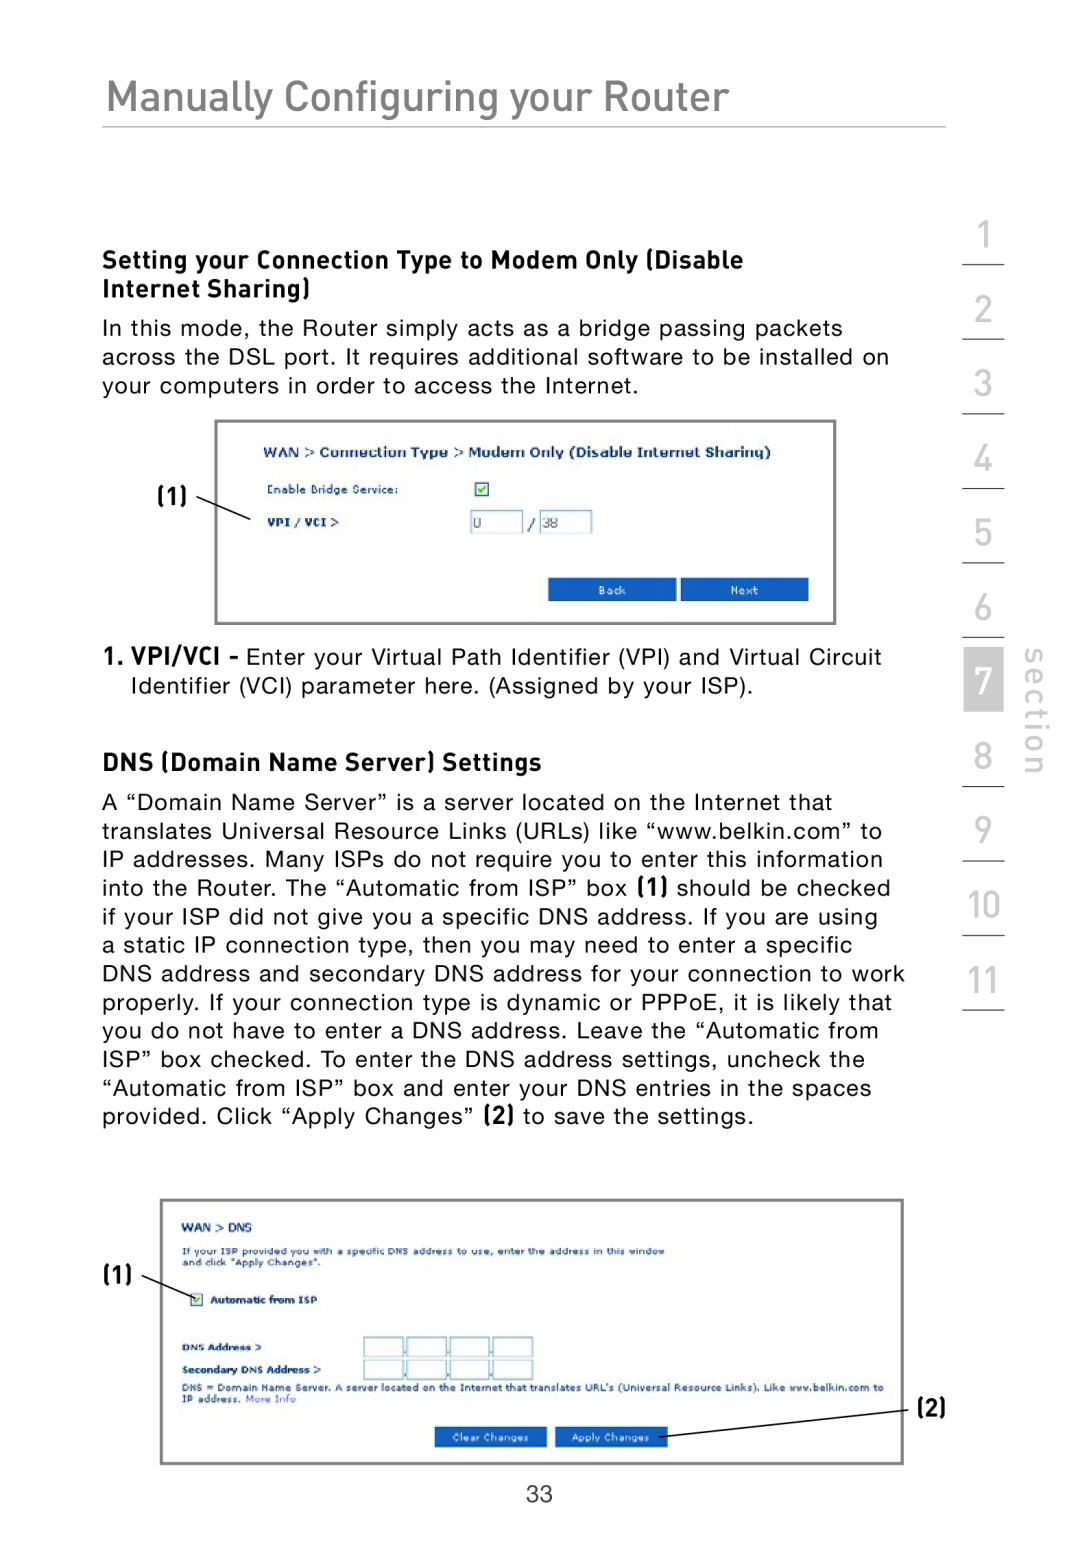 Belkin Pre-N Setting your Connection Type to Modem Only Disable Internet Sharing, DNS Domain Name Server Settings, section 